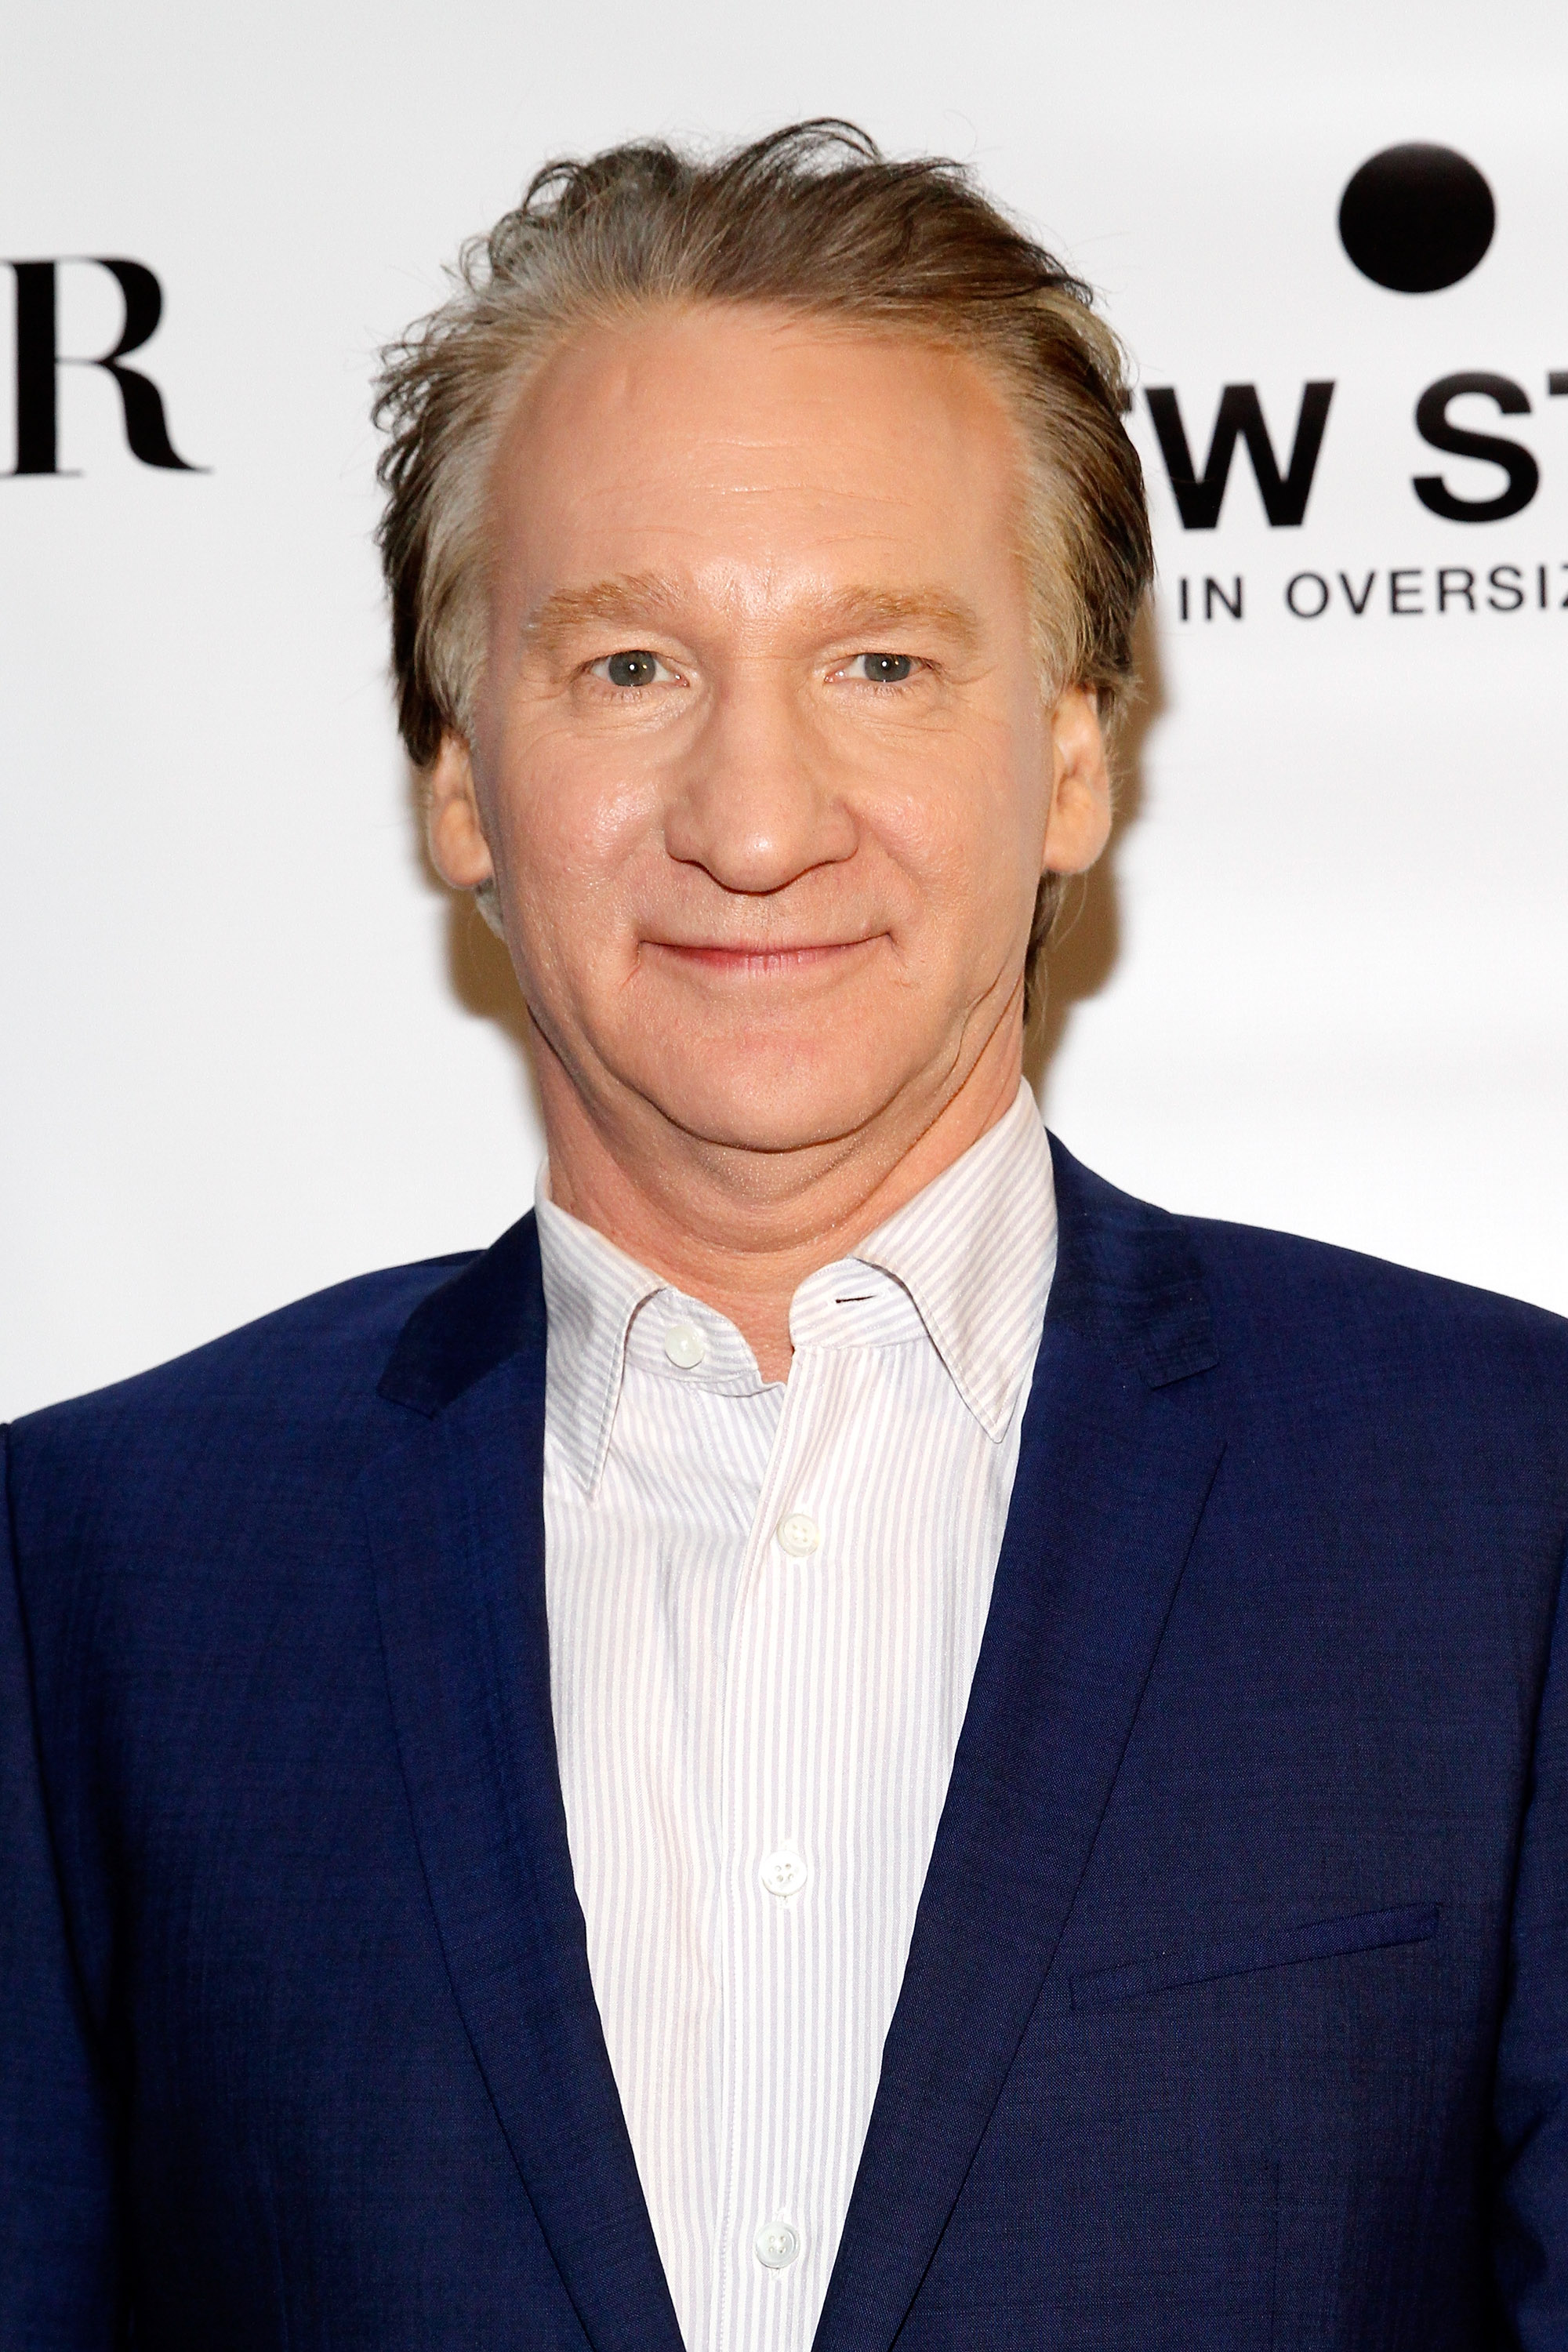 DuJour Magazine's Jason Binn And Scott Sartiano Celebrate Bill Maher’s Cover At UP&DOWN Presented By GILT And TW STEEL